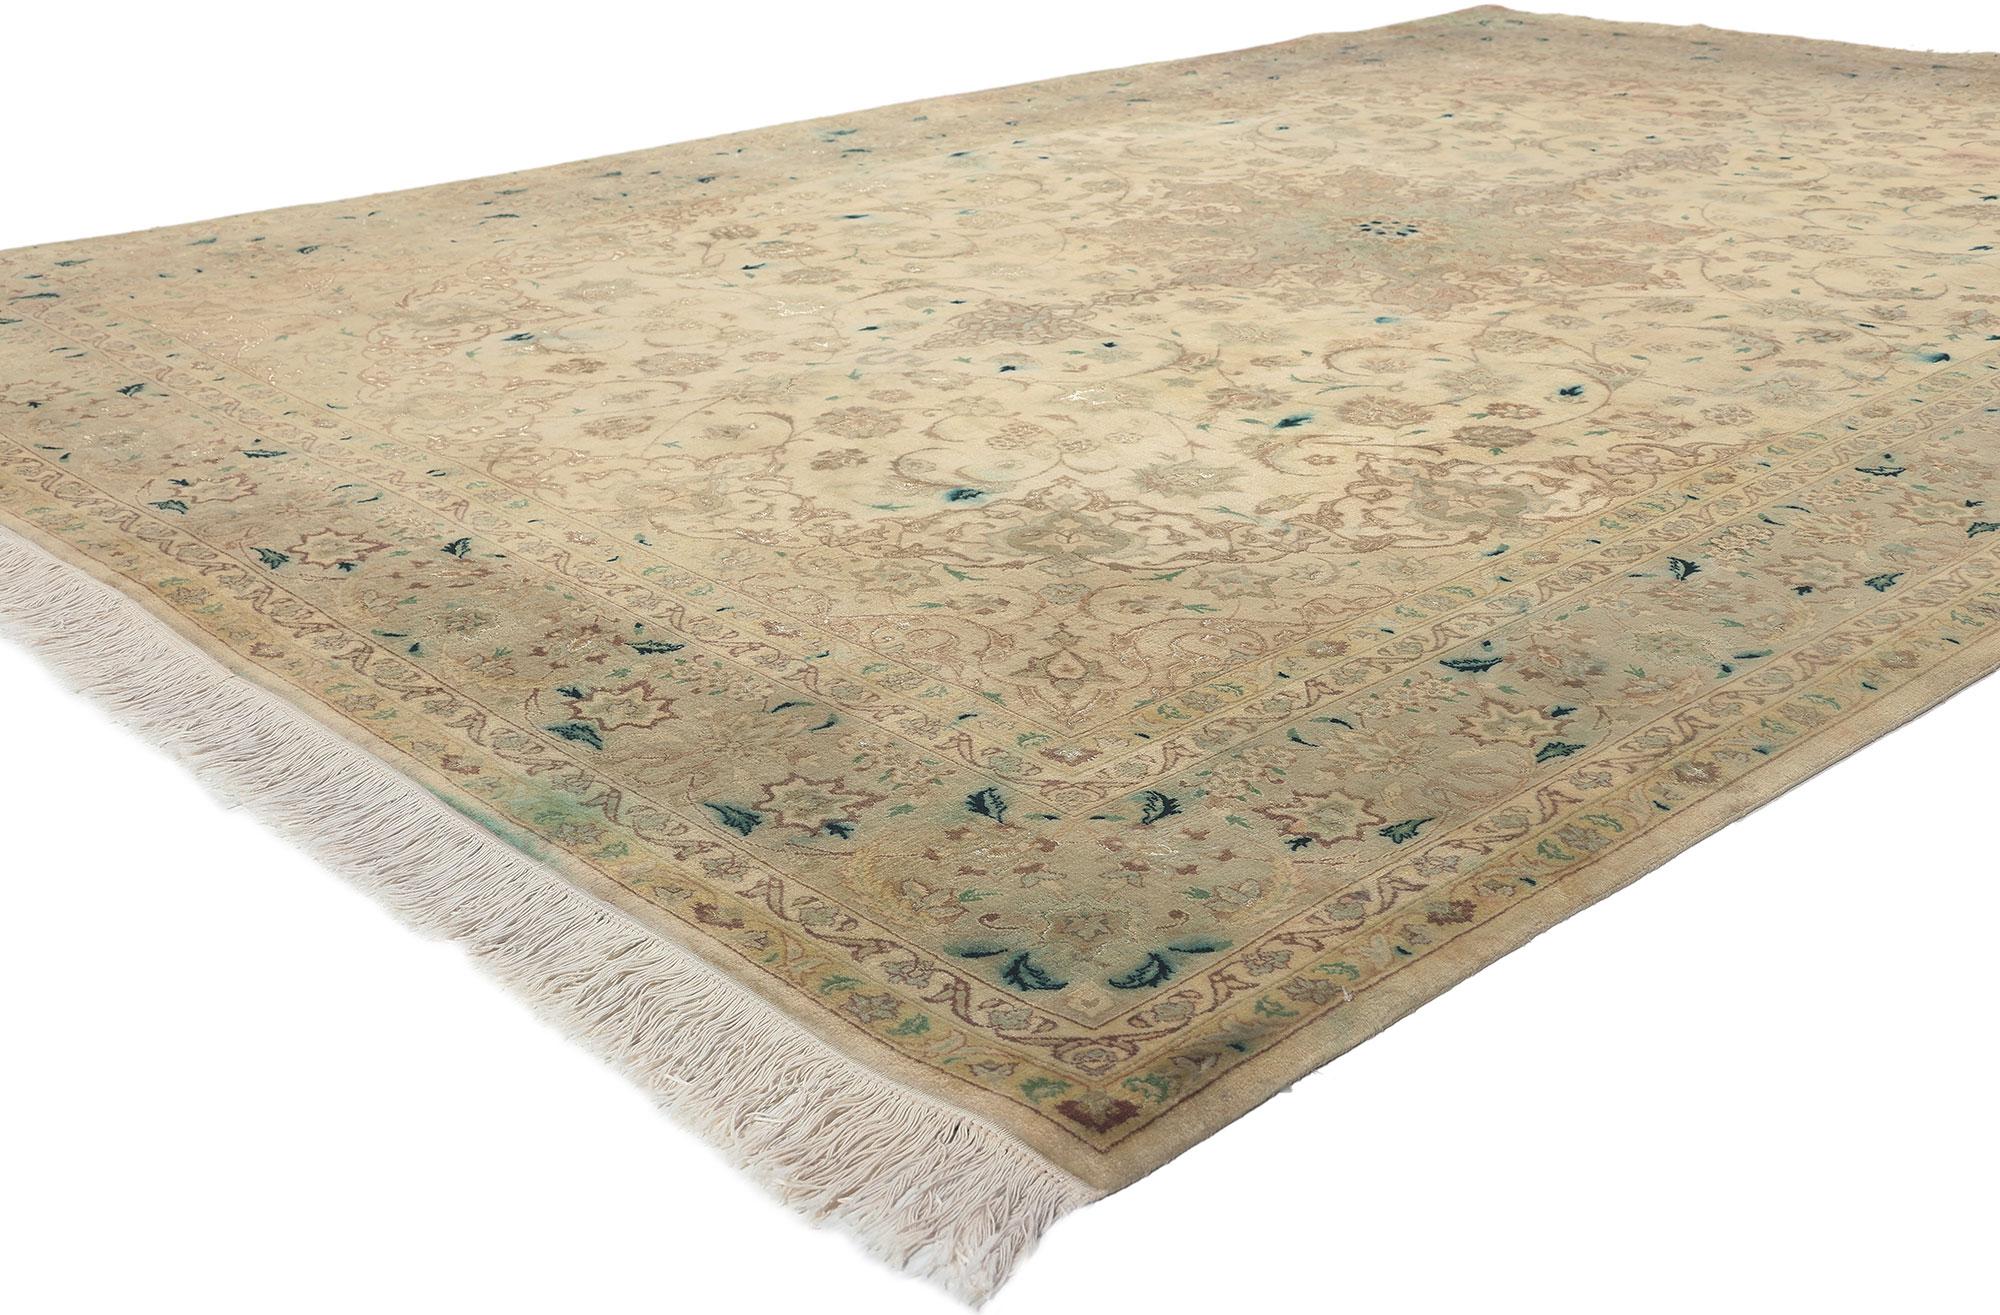 76976 Vintage Persian Tabriz Rug, 06'08 x 10'00. 
Refined elegance meets soft, bespoke Bridgerton style in this hand knotted wool and silk Persian Tabriz rug. The elaborate botanical details and soft pastel colorway woven into this piece work